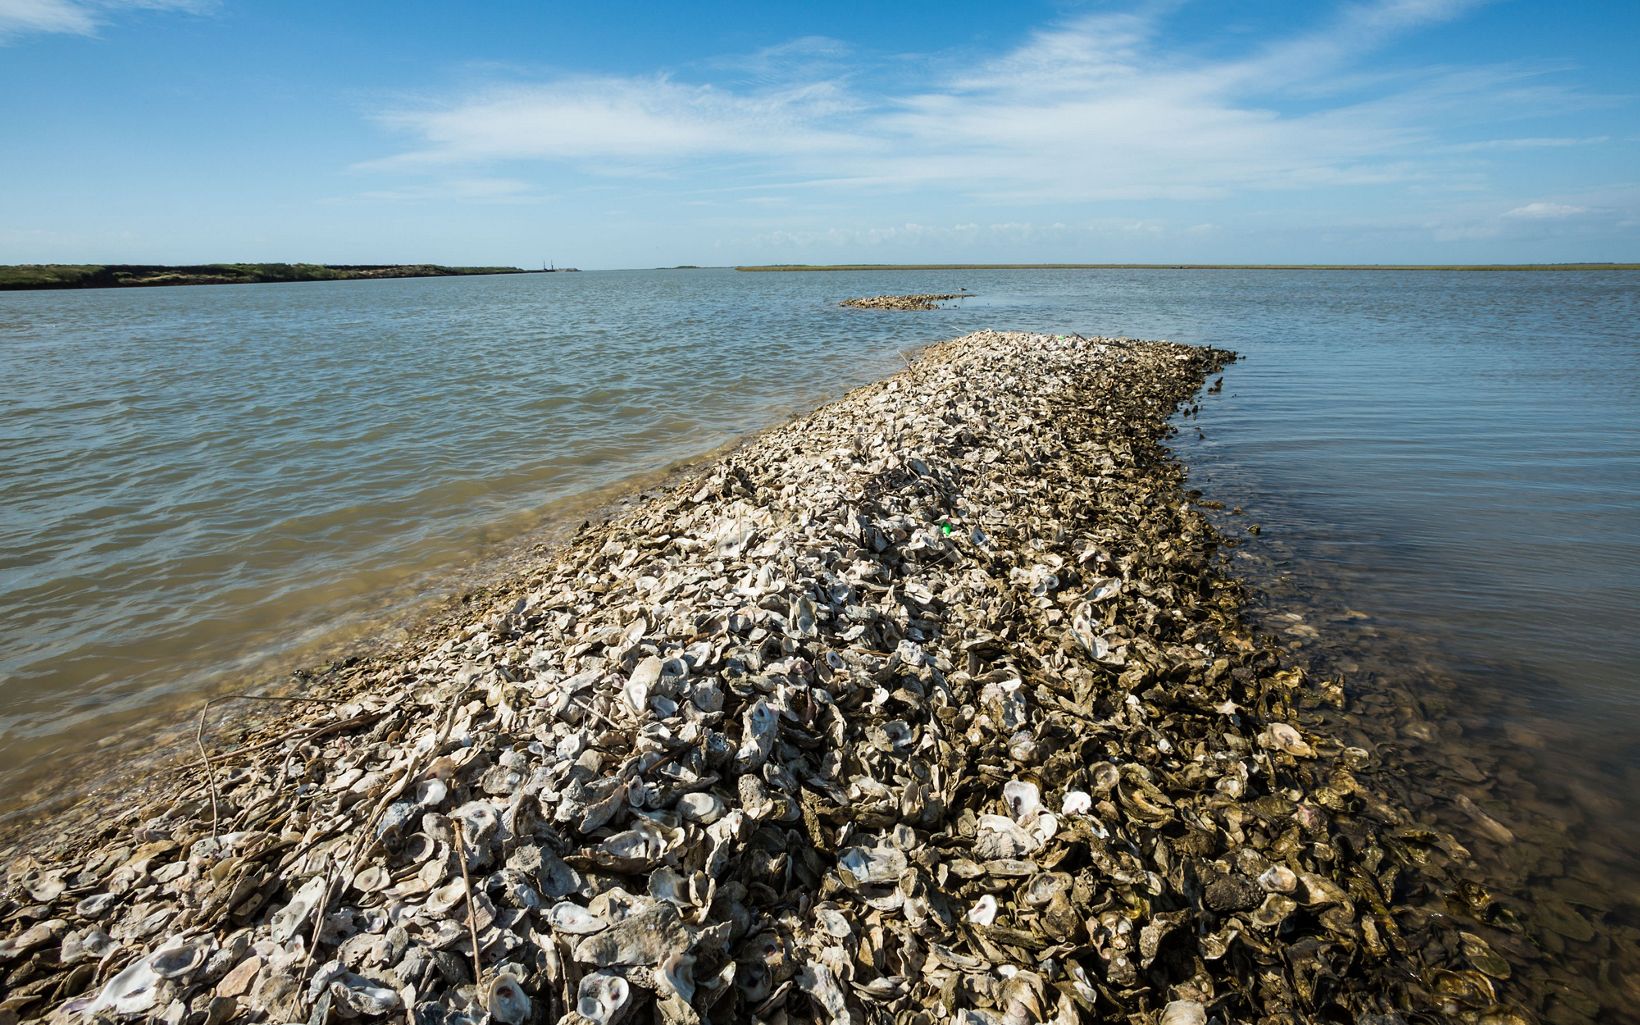 A row of oyster shells in the water.